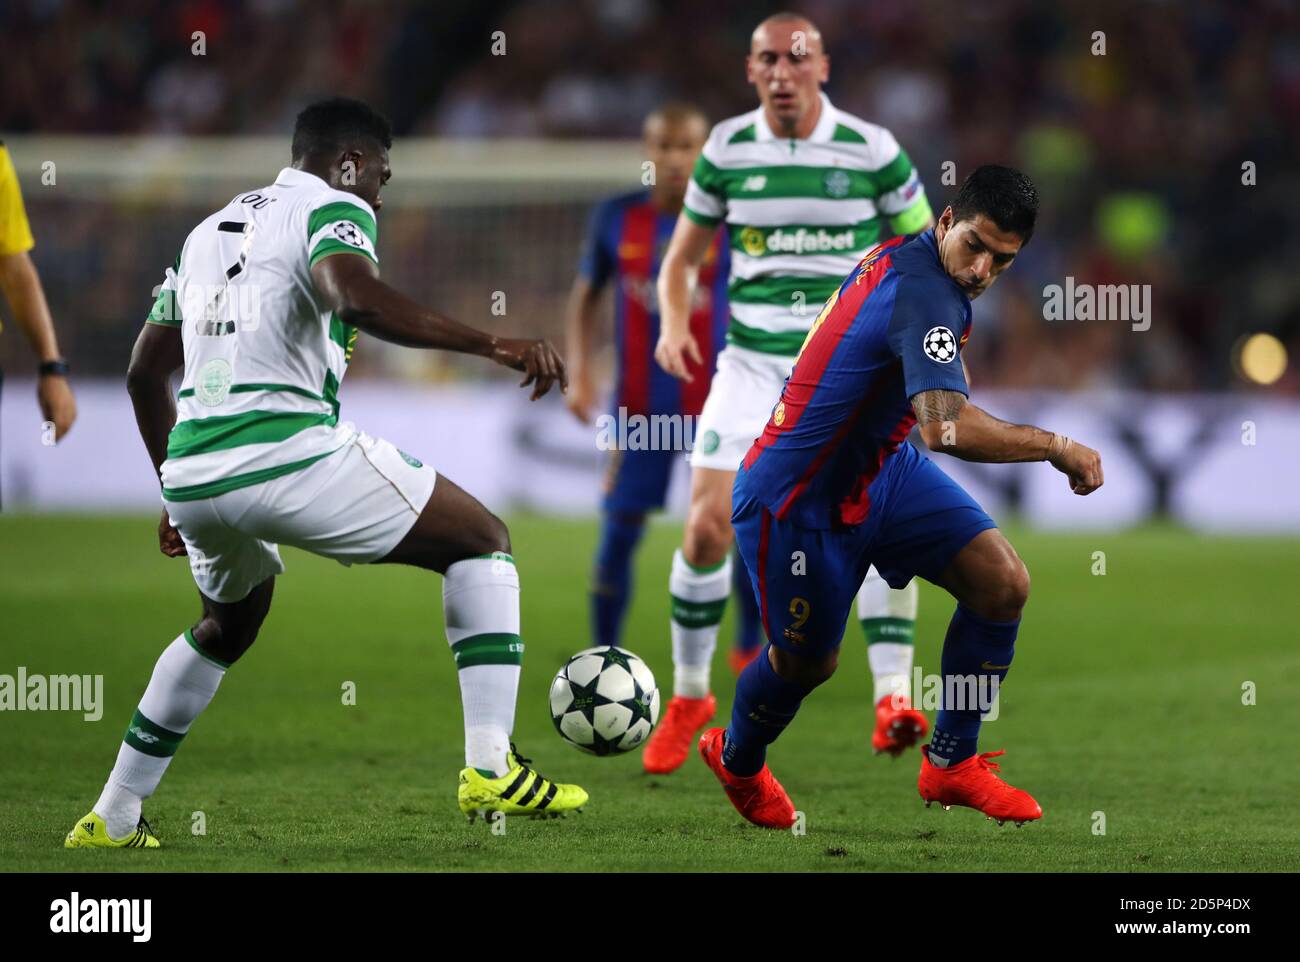 Barcelona's Luis Suarez (right) and Celtic's Kolo Toure battle for the ball Stock Photo